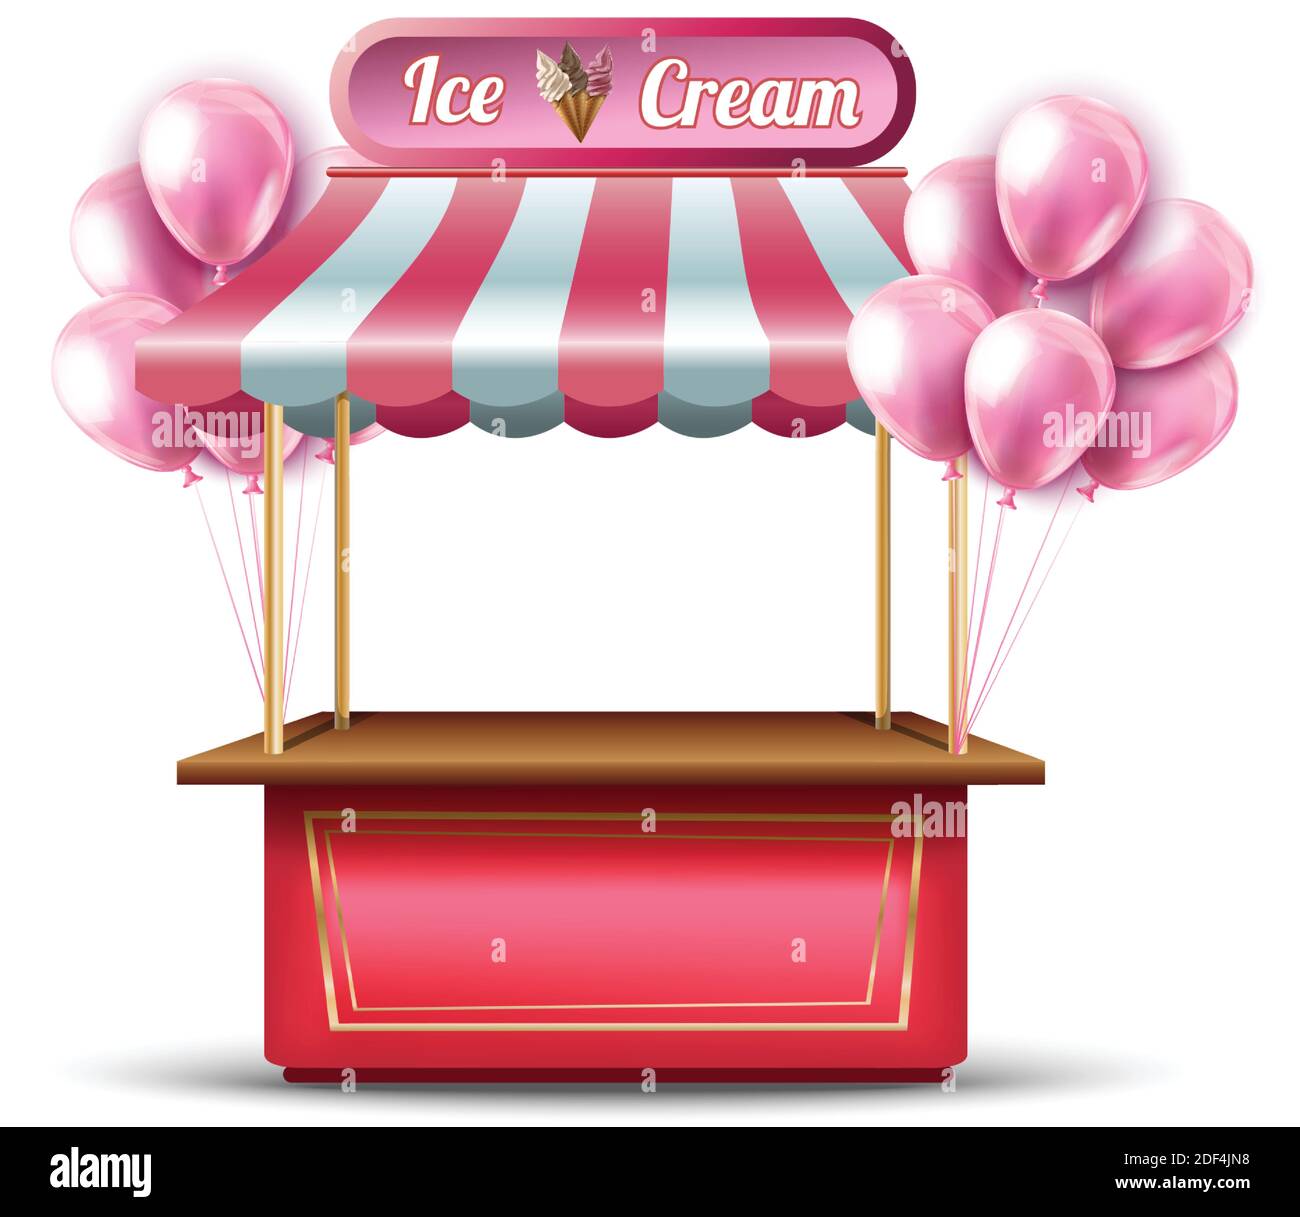 pink ice cream opening shop booth icon with balloons. Stock Vector